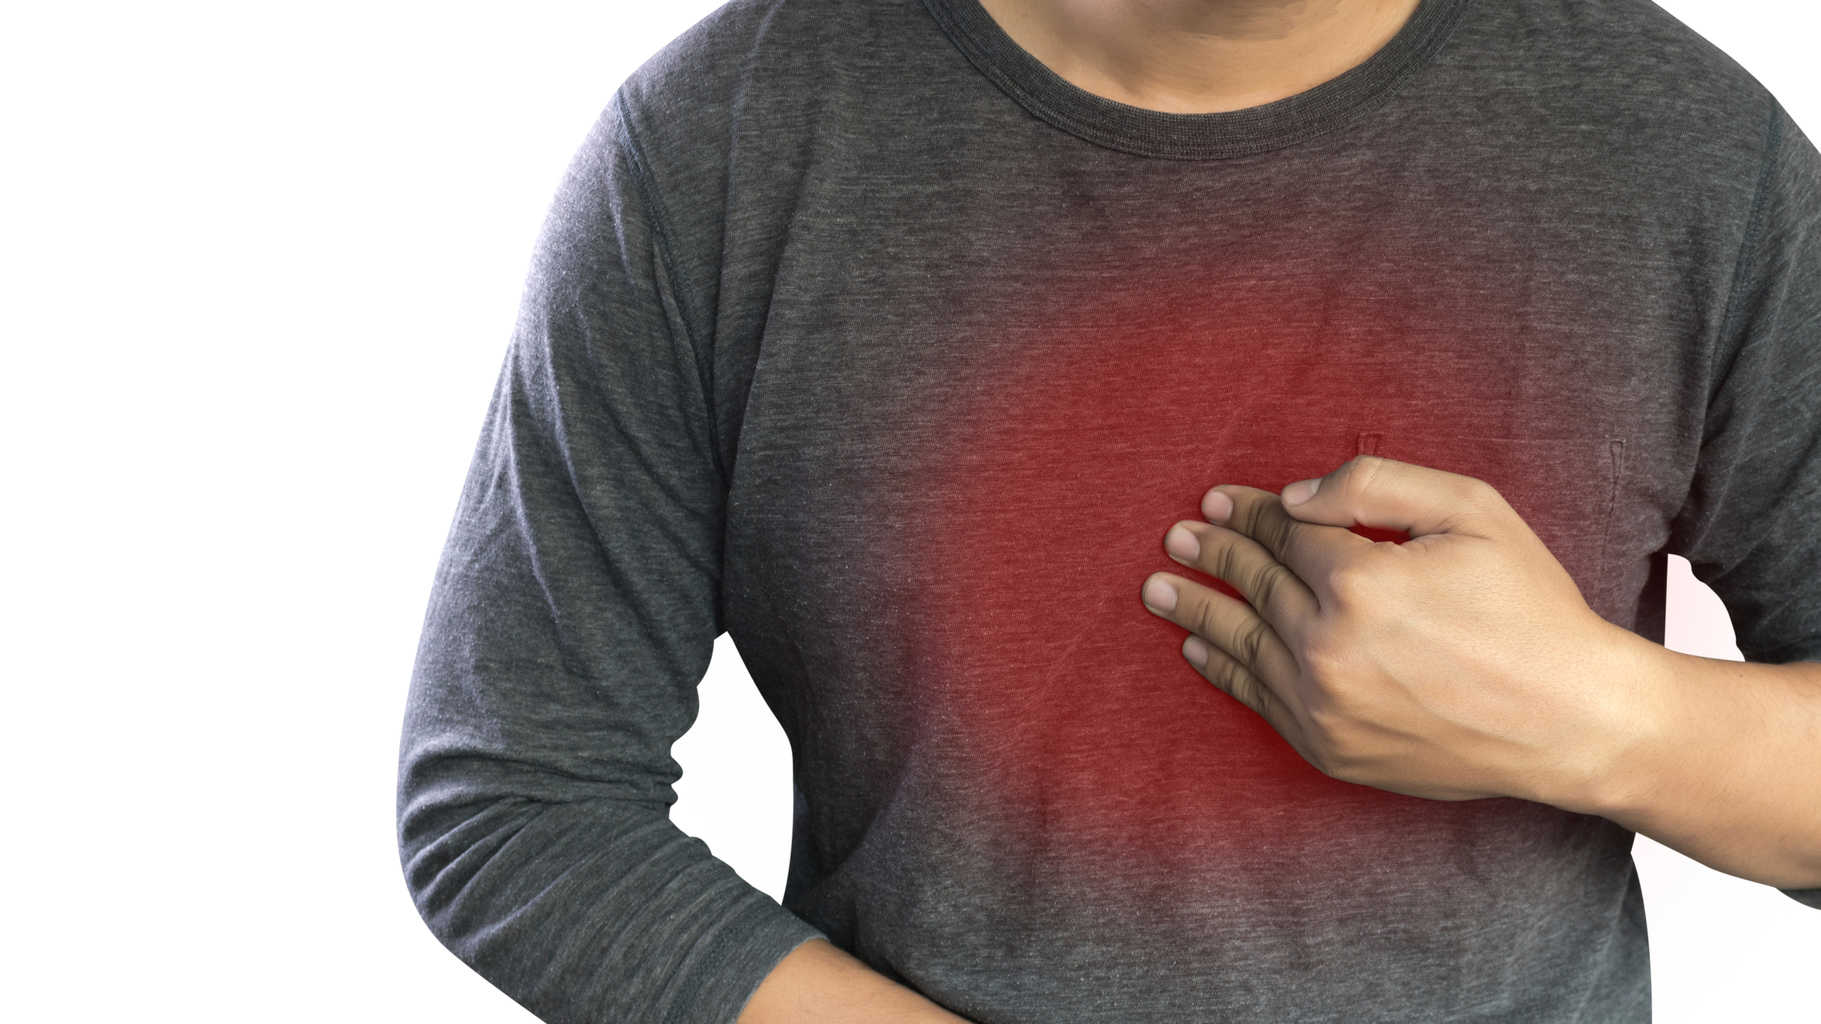 Acid reflux isn’t caused by stomach acid